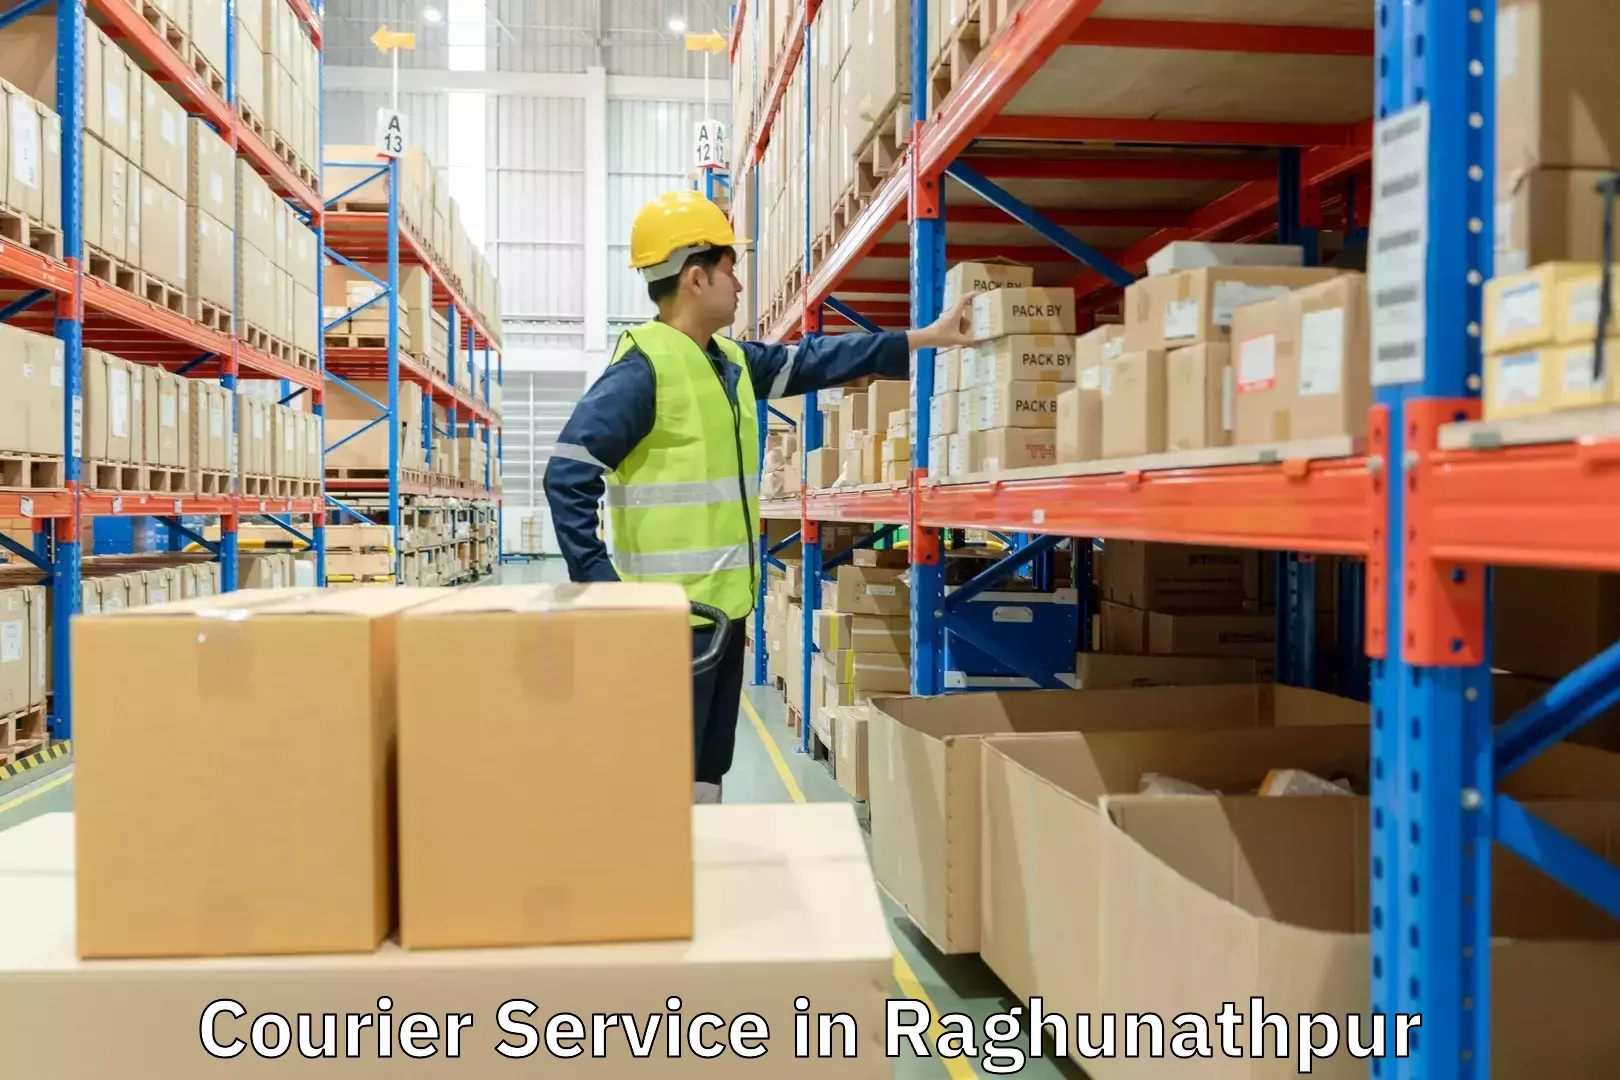 Professional parcel services in Raghunathpur